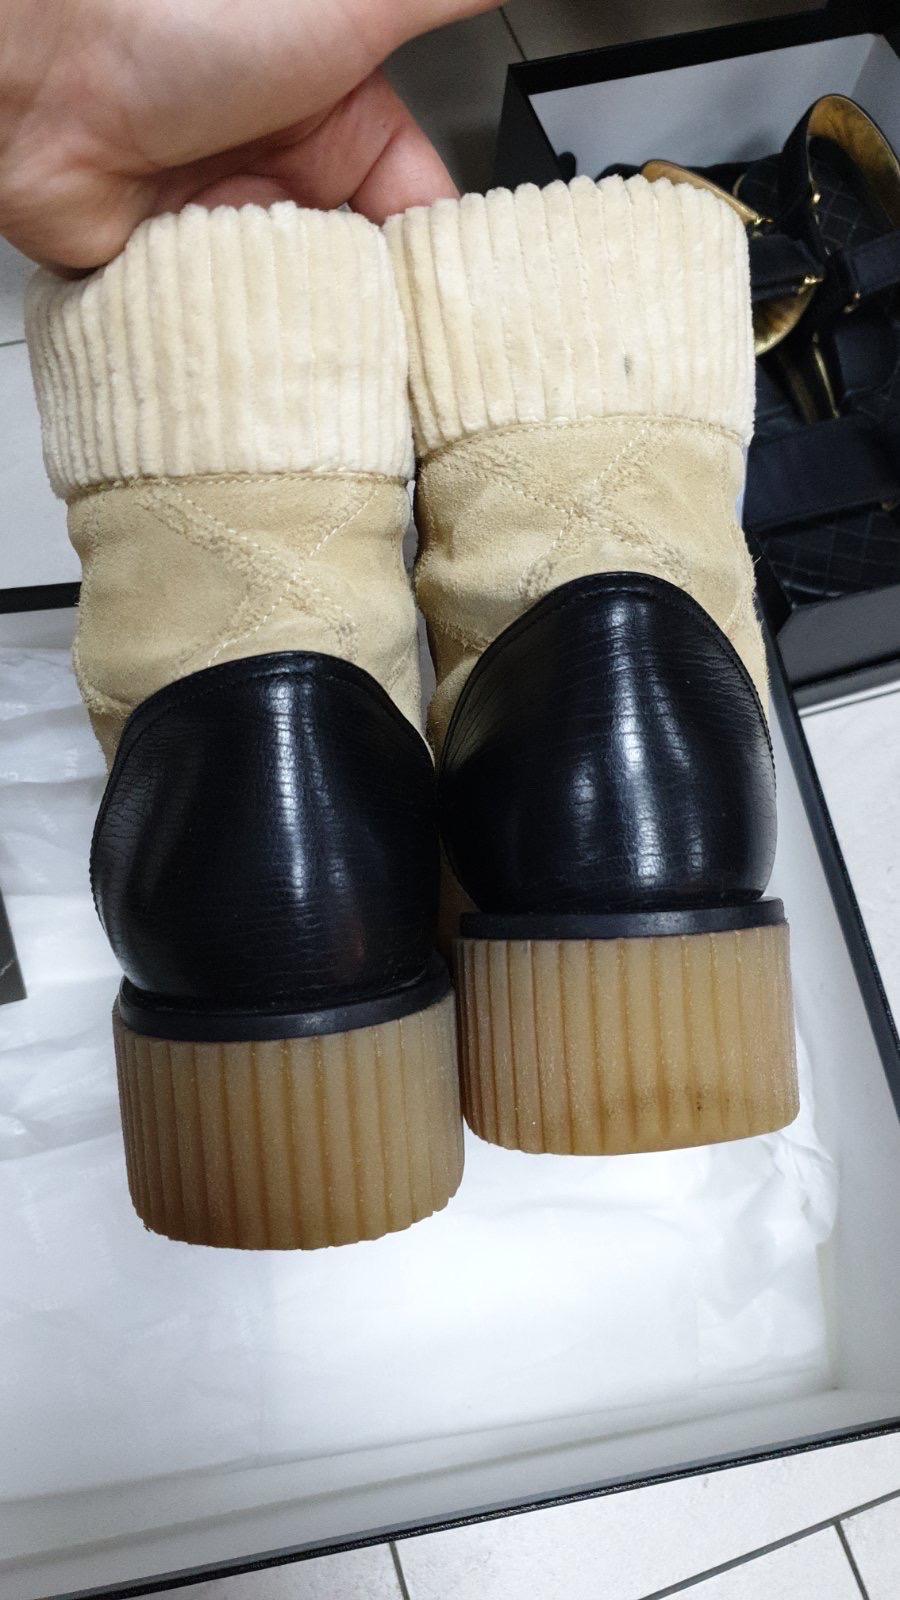 chanel lace up boots